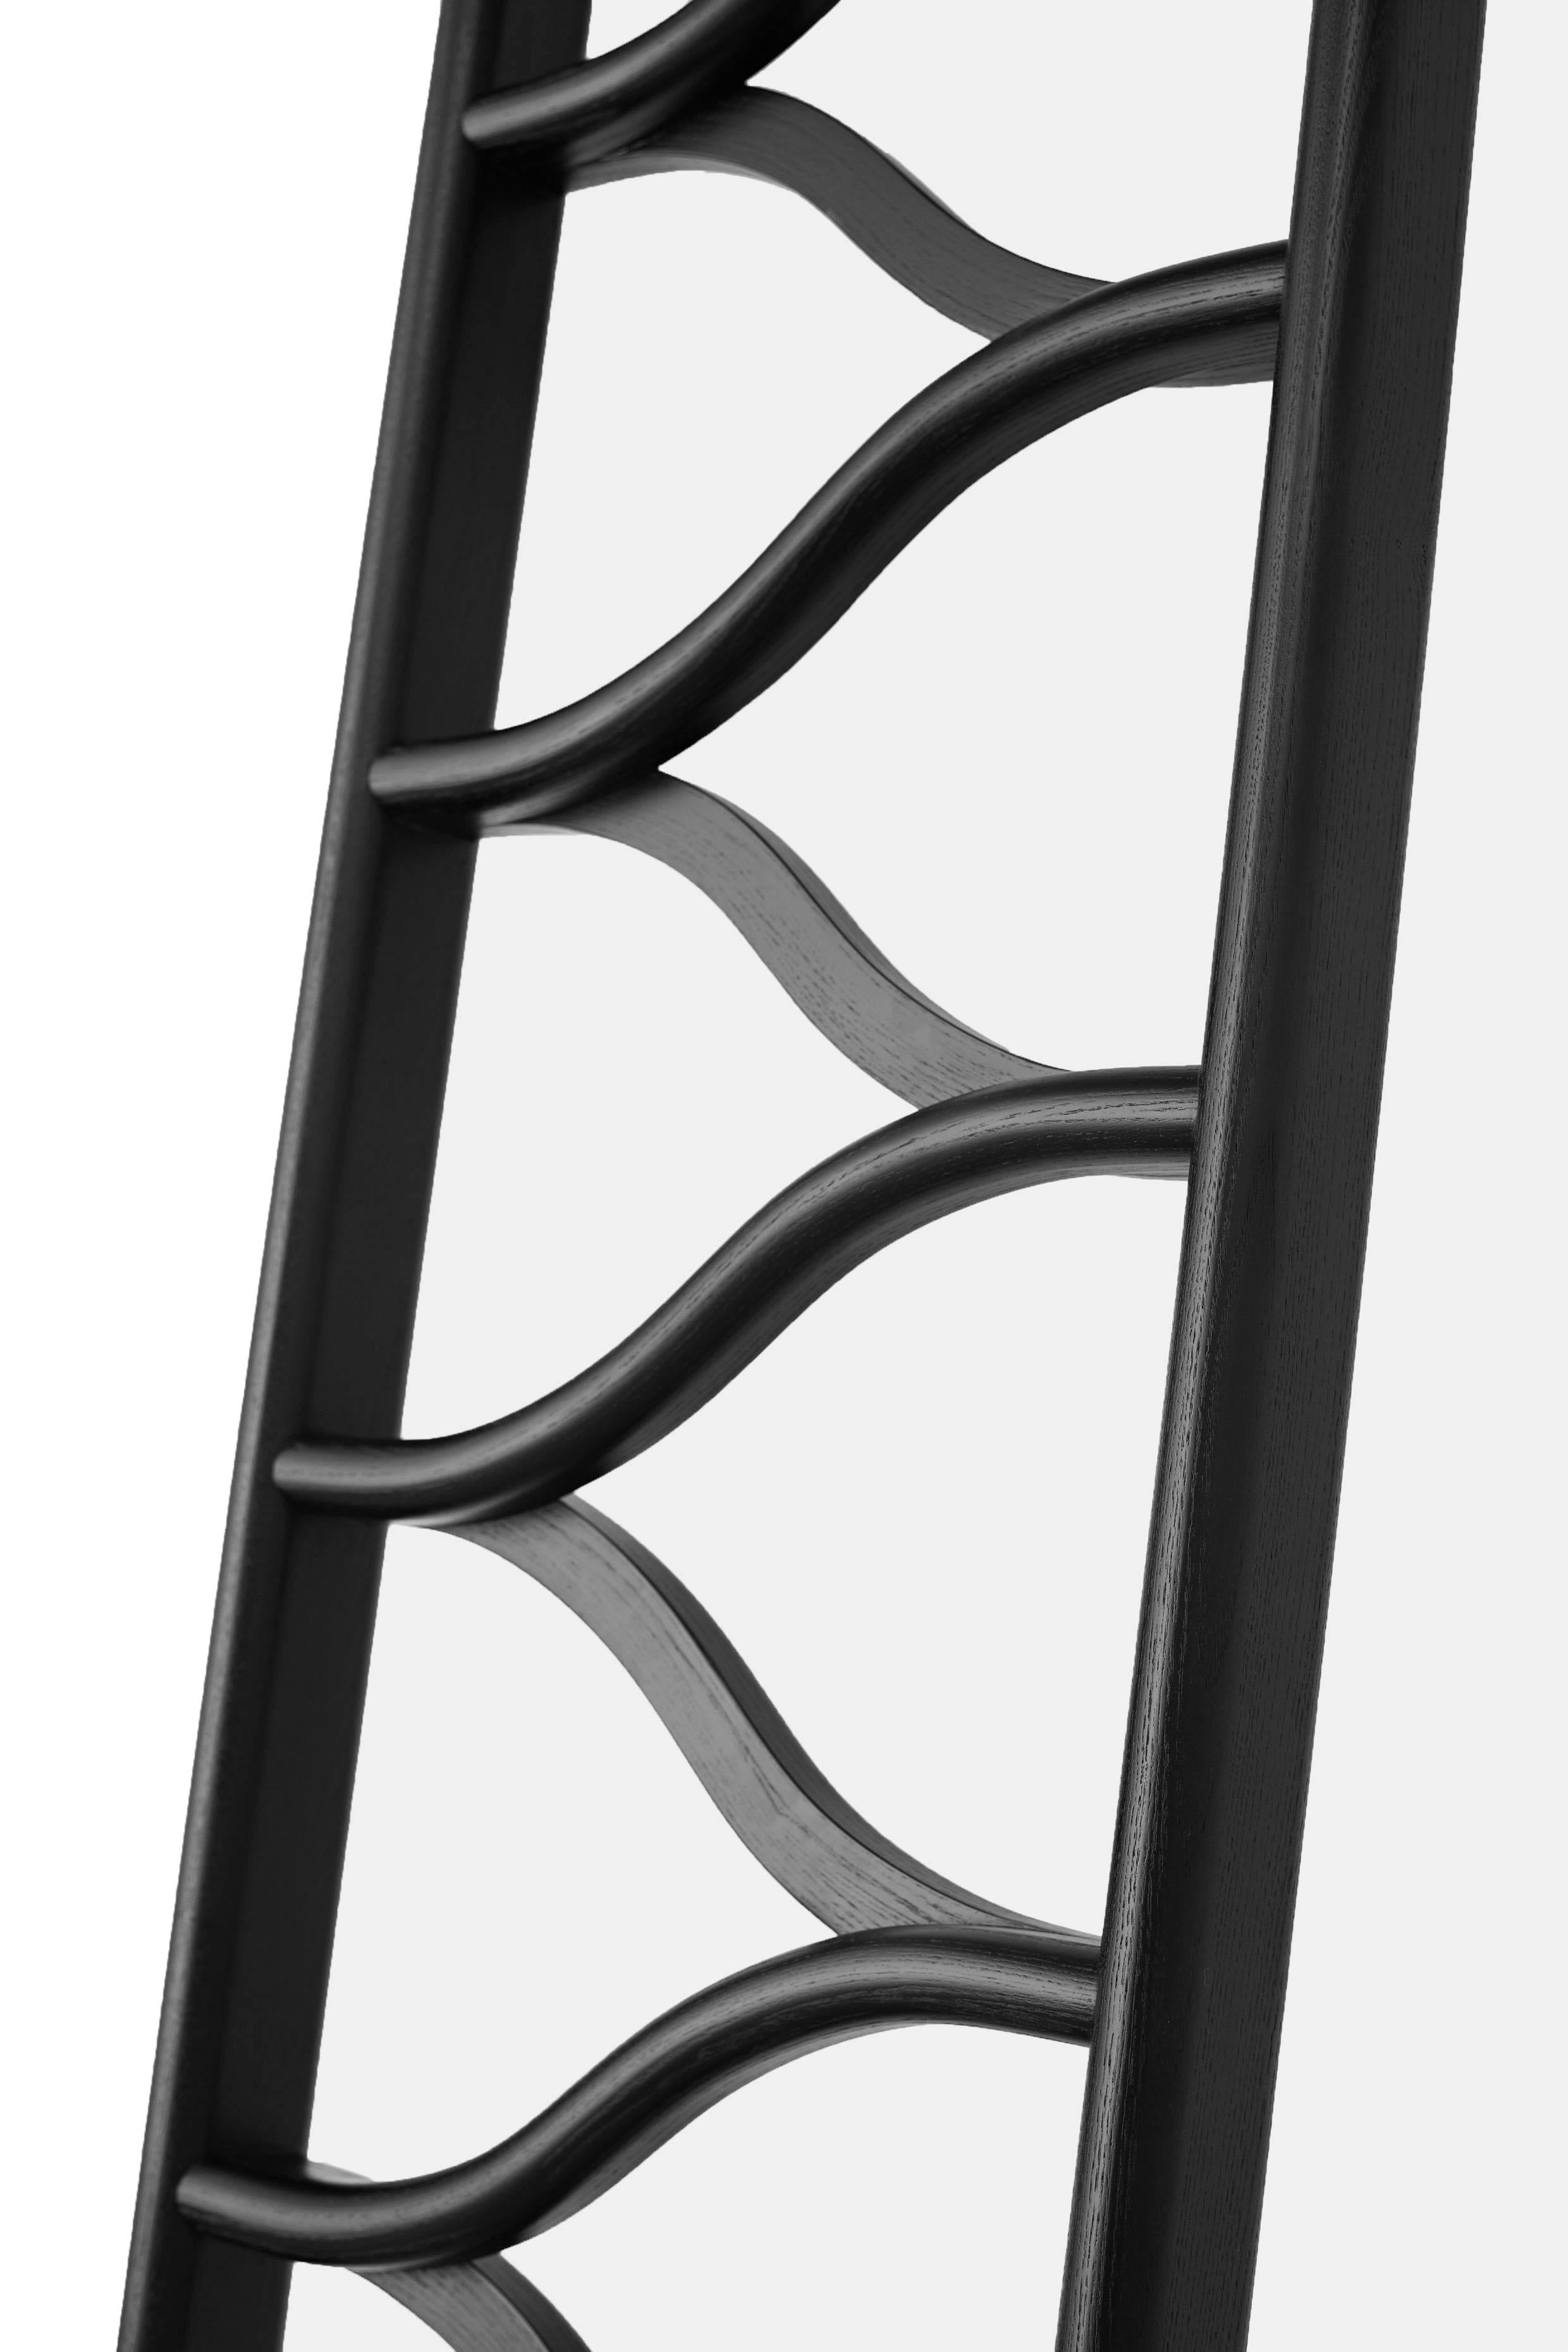 Austrian Ladder in Bentwood, Steam-formed Ash, Laquered in black For Sale